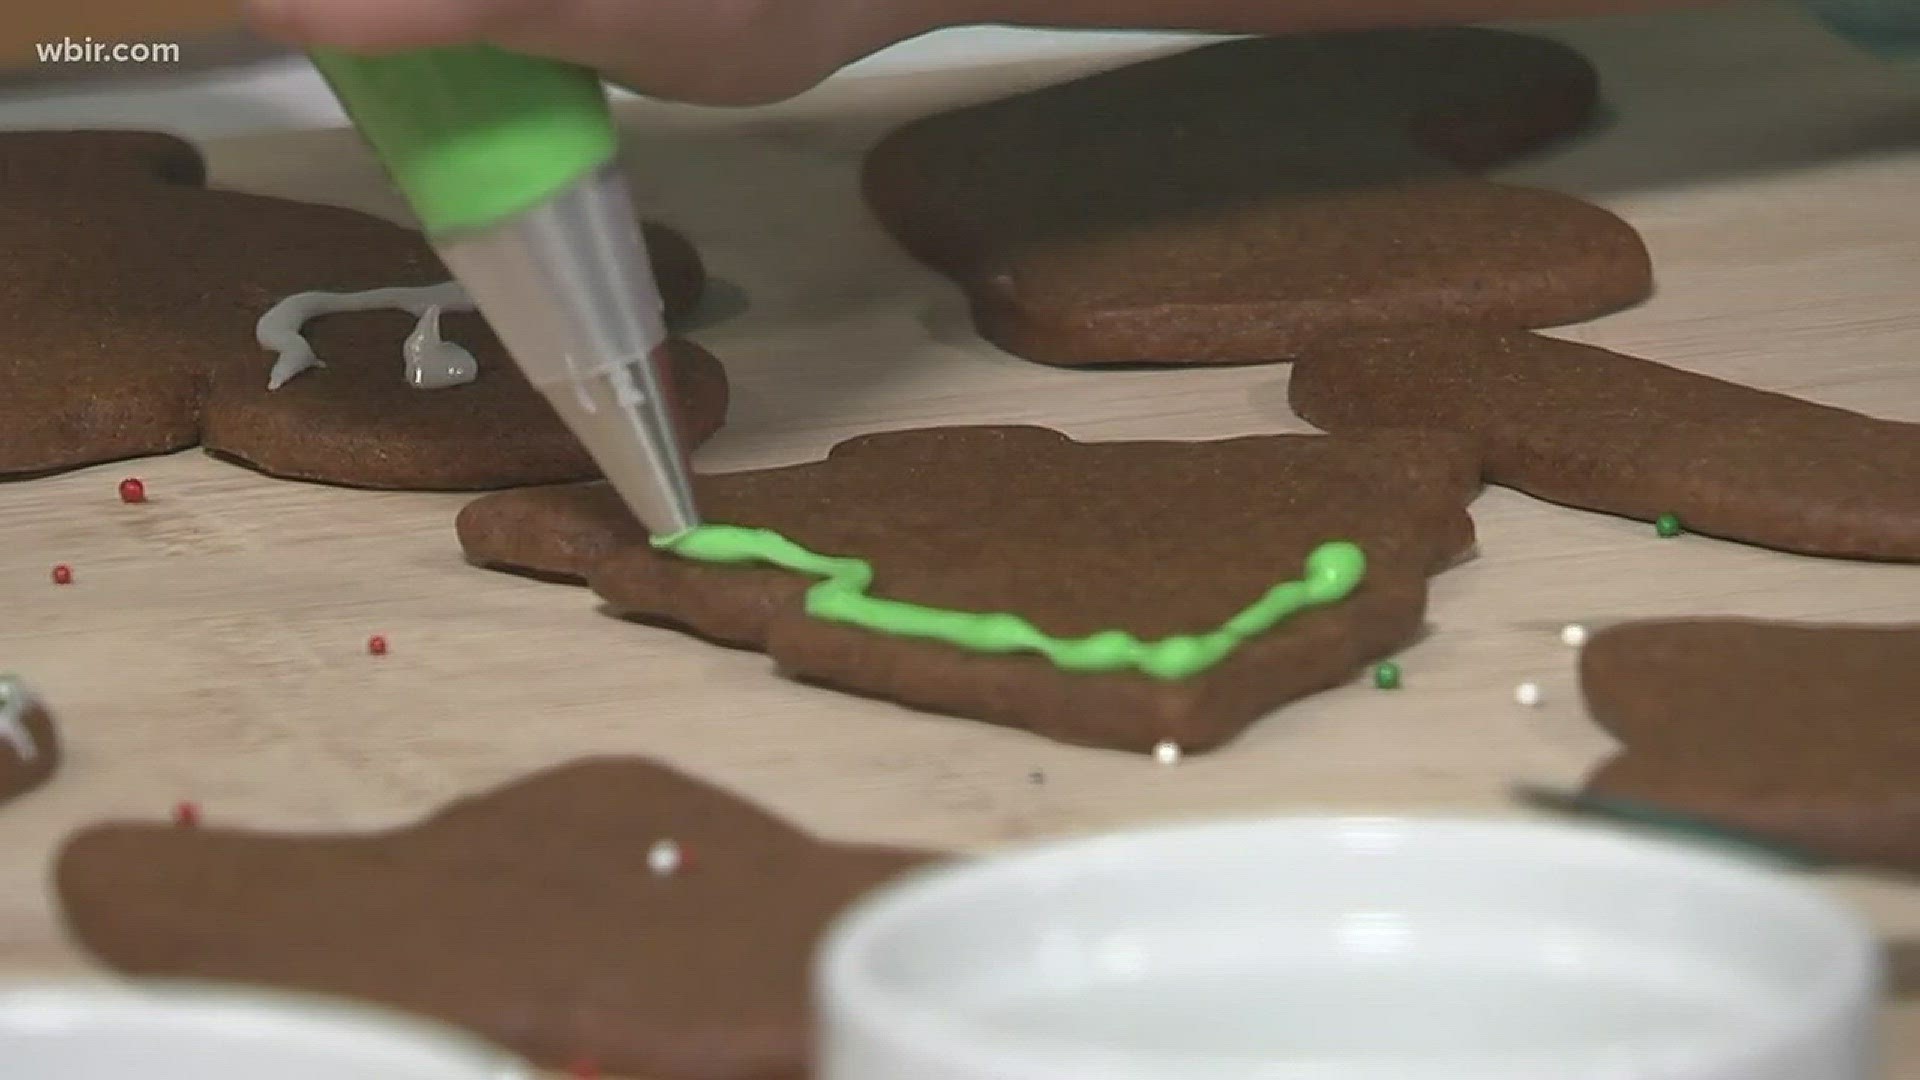 Mahasti Vafaie from The Tomato Head shares her recipe for gingerbread men